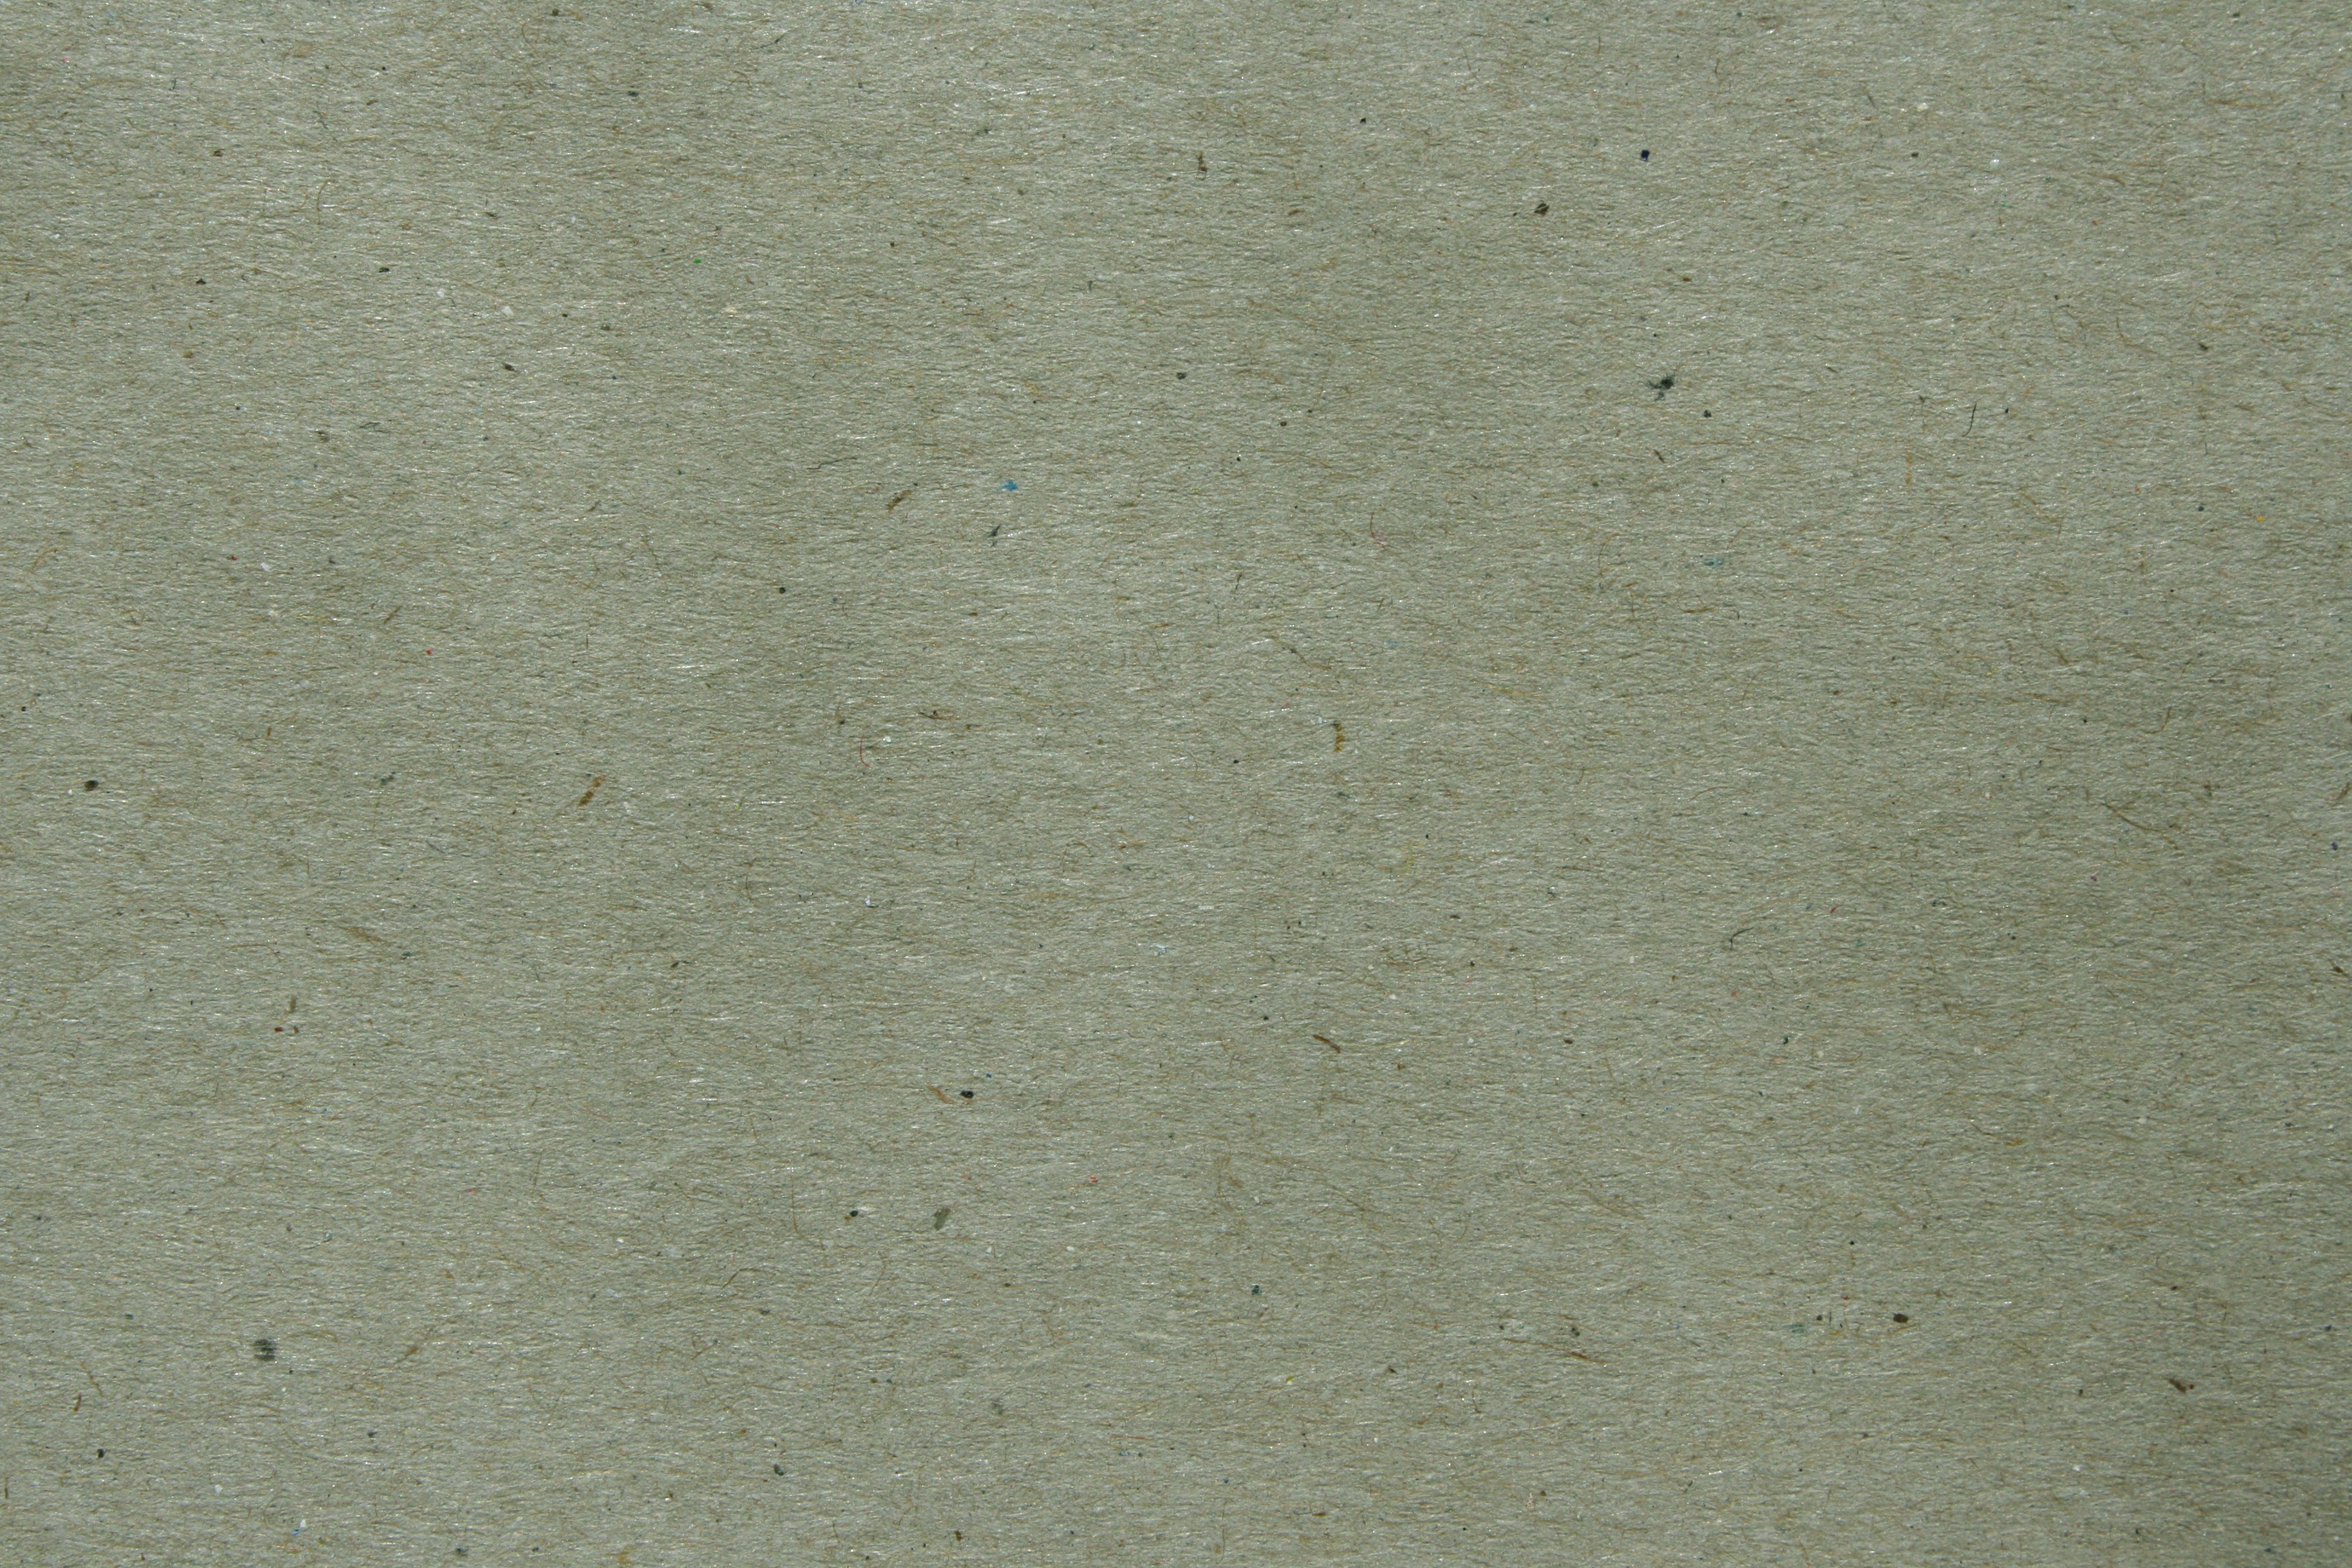 Olive Green Paper Texture with Flecks Picture | Free Photograph ...